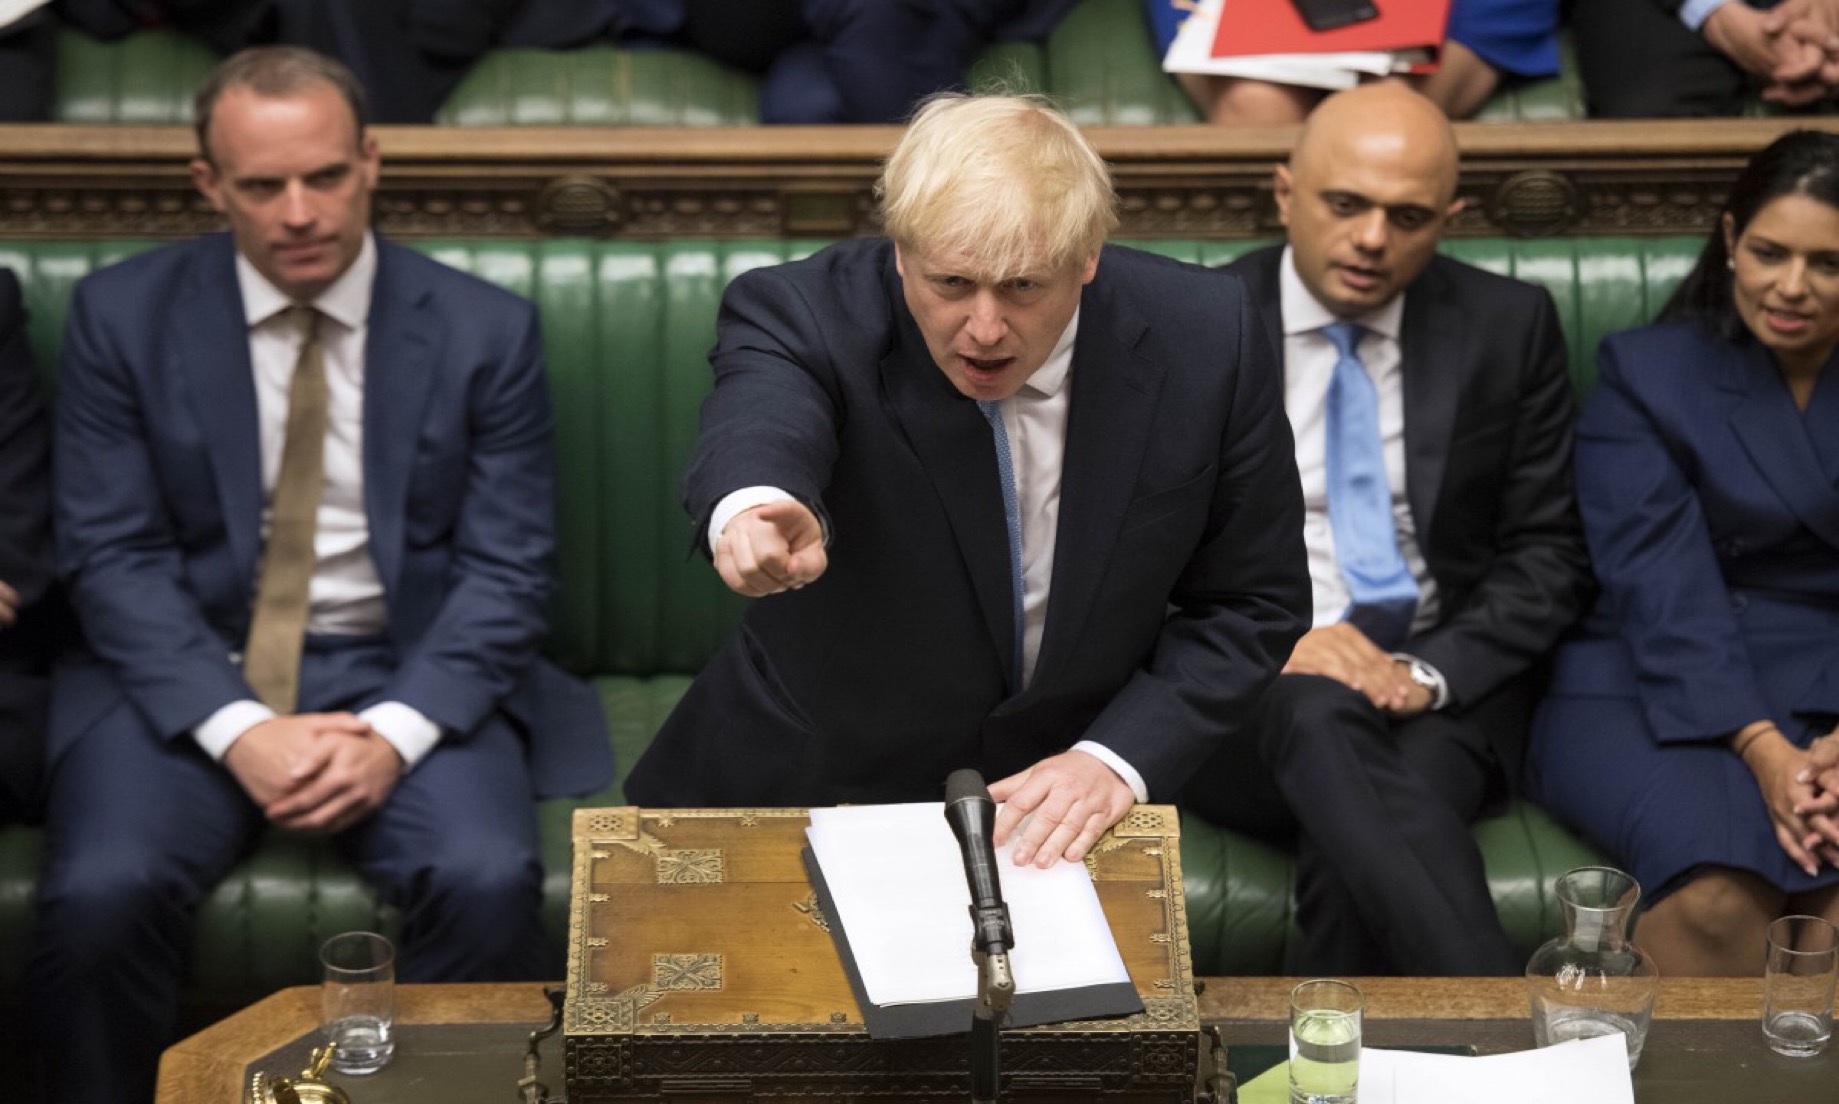 Lawmakers to reject election call before Johnson suspends parliament